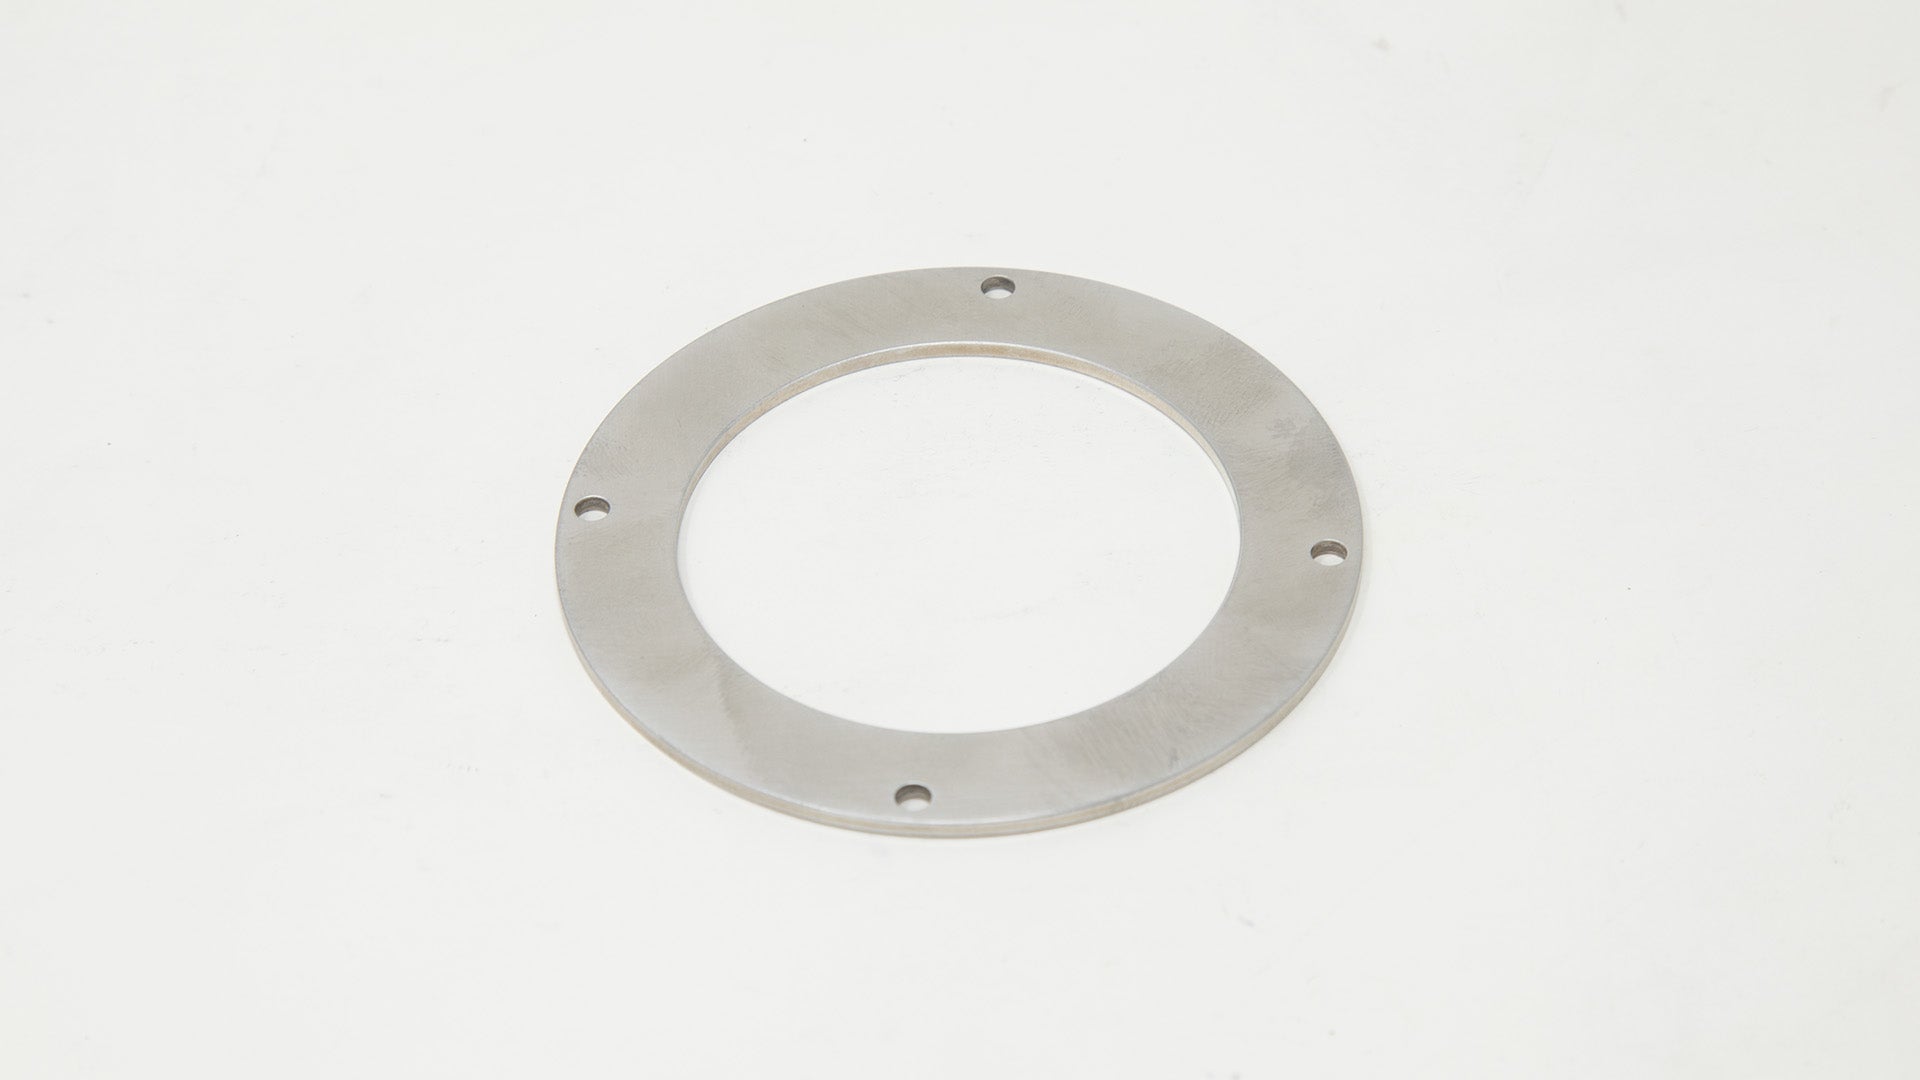 Round ring with four holes.